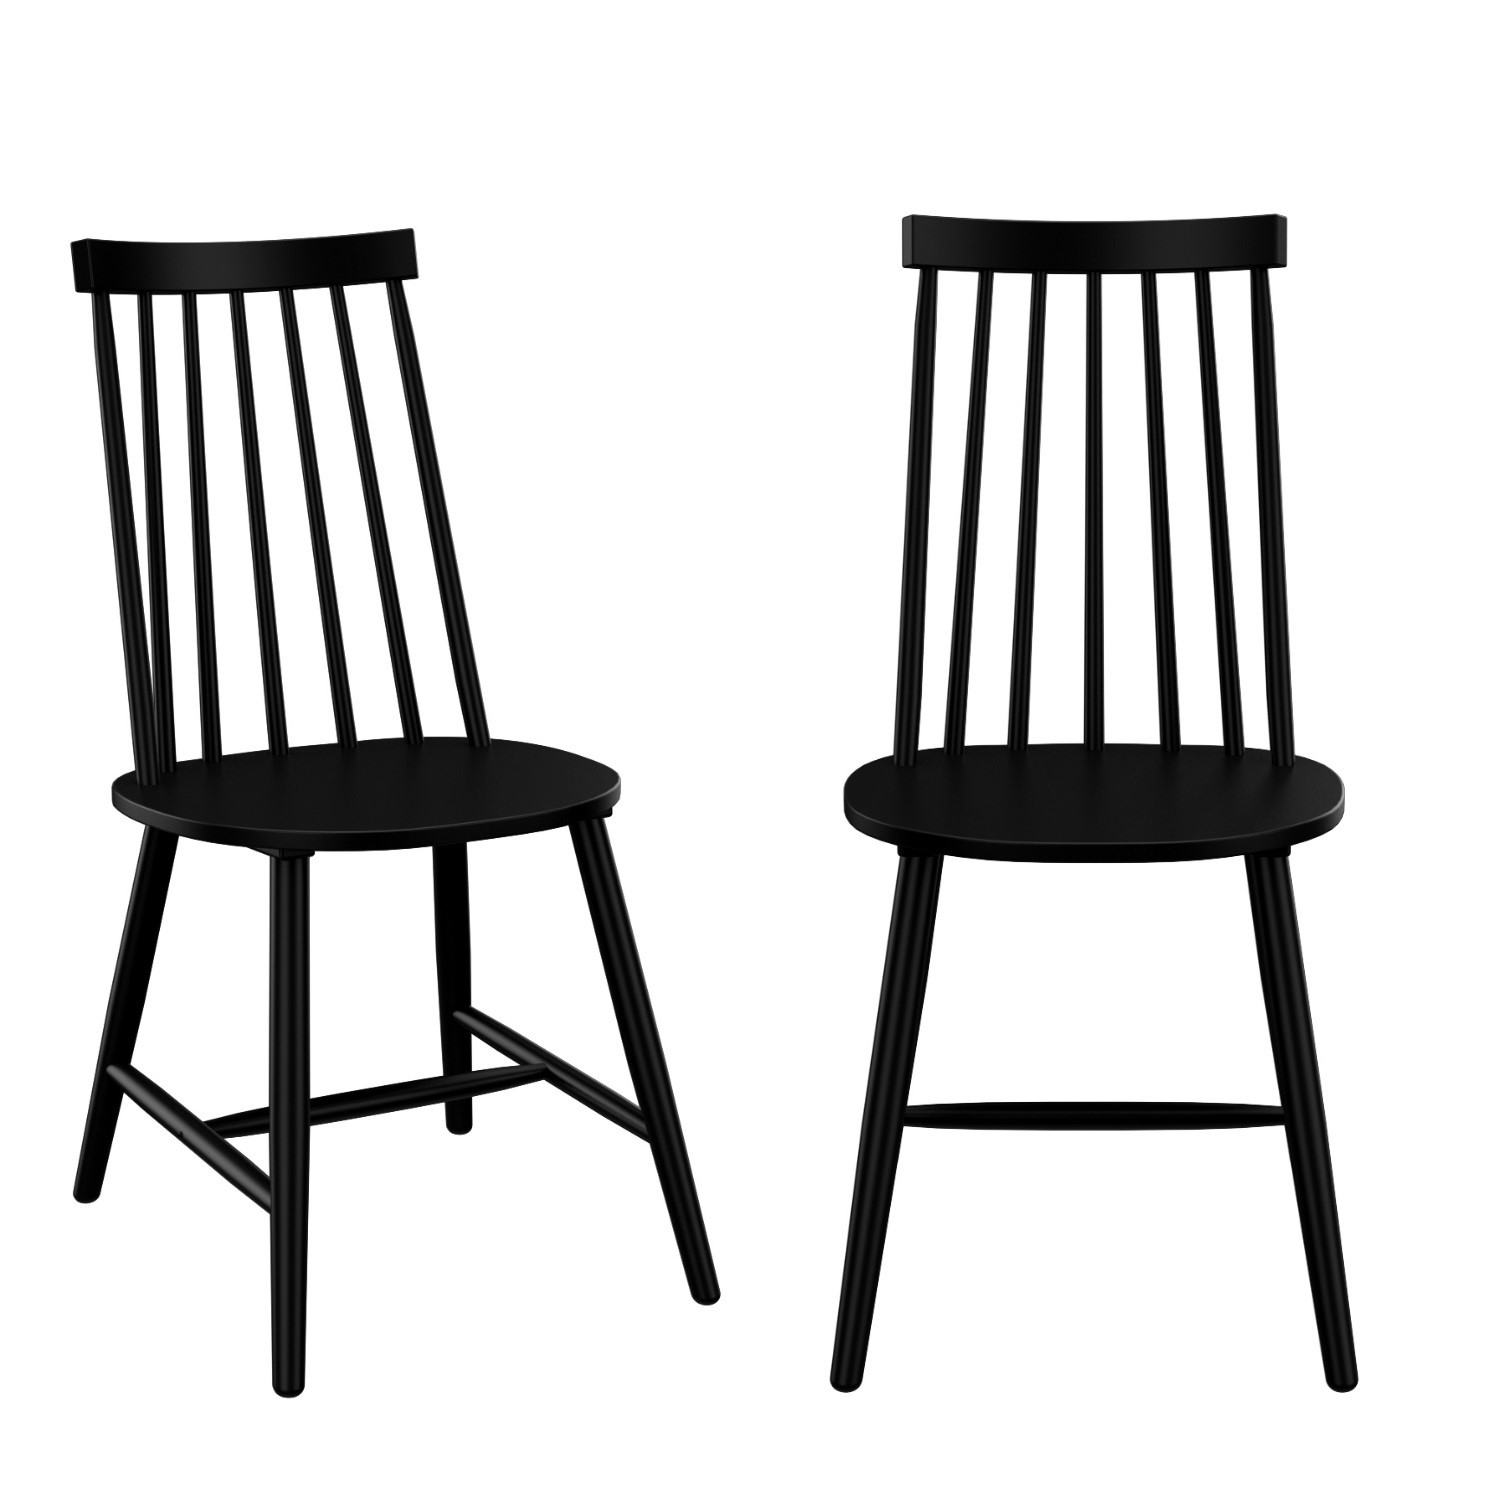 Photo of Set of 2 black wooden spindle dining chairs - cami